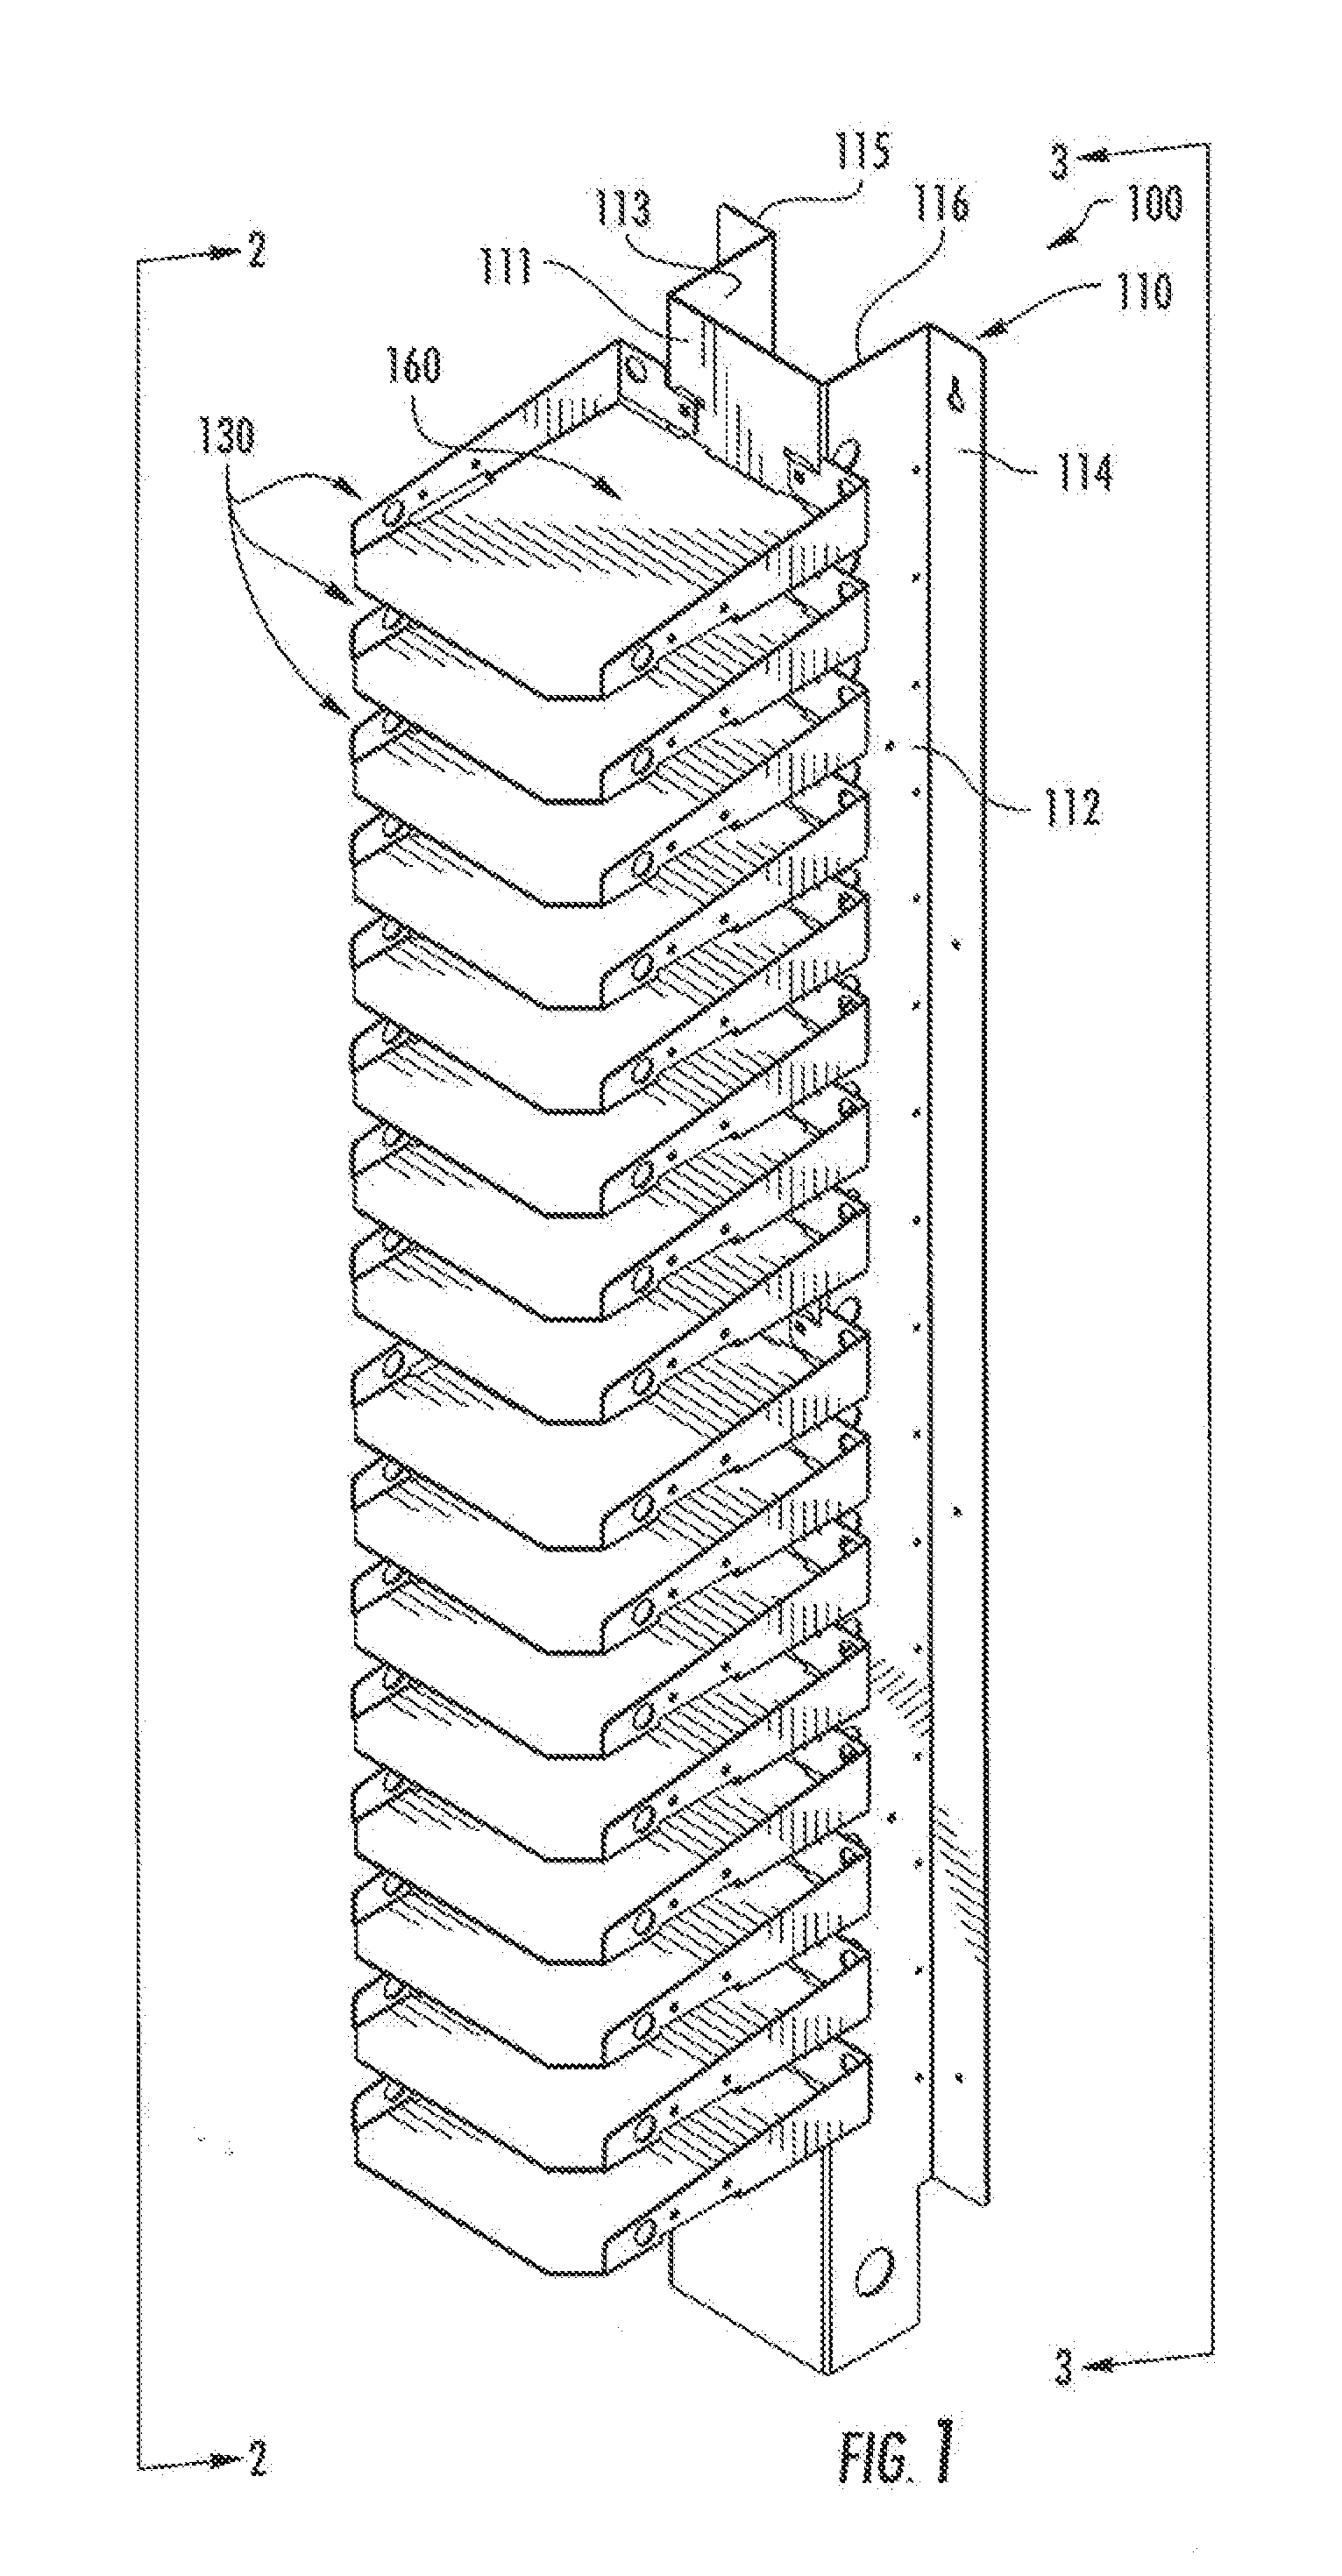 Storage and charging station system for portable electronic devices